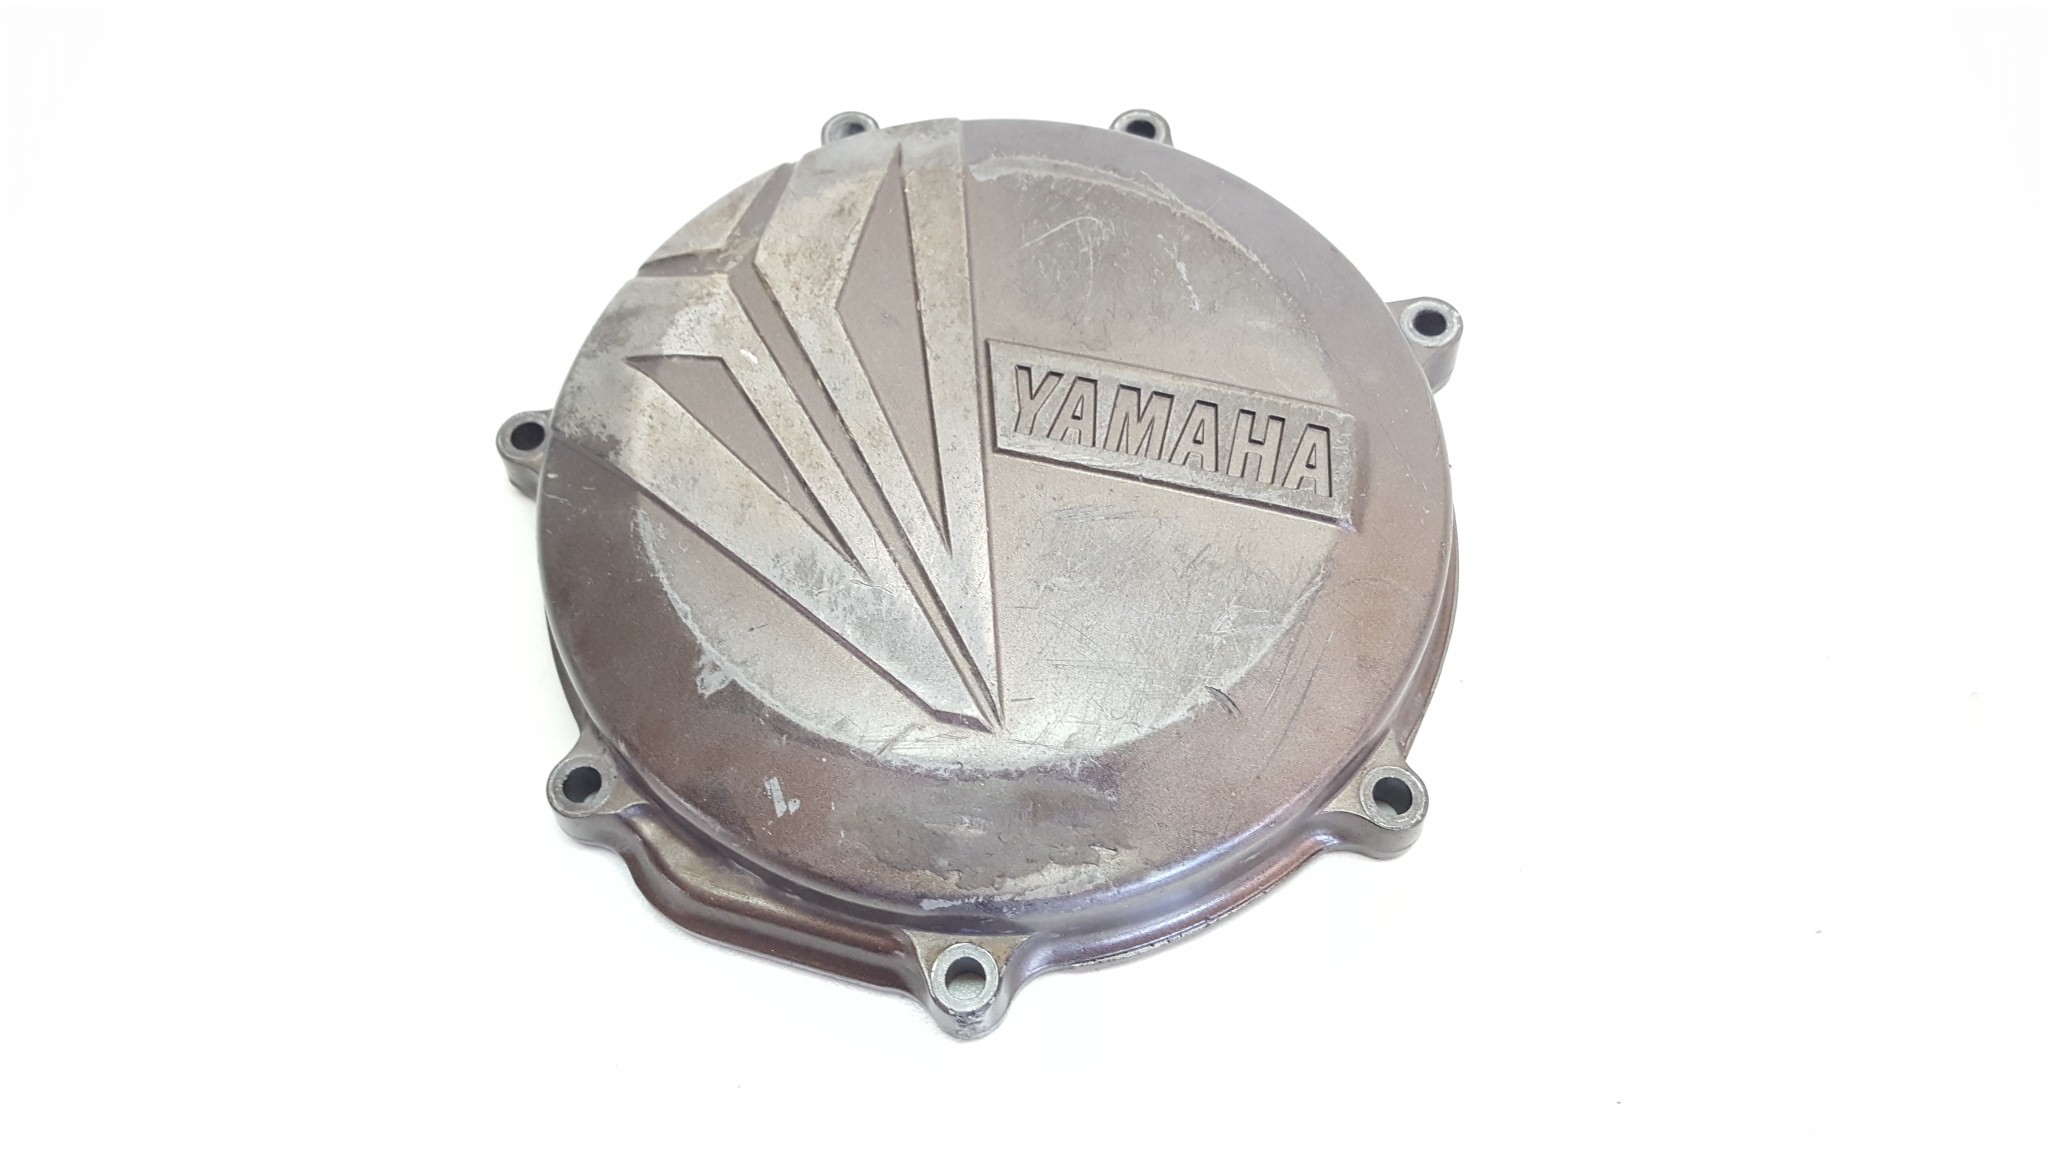 Cracked Outer Clutch Cover Yamaha YZ450F 2012 10-17 WR #710